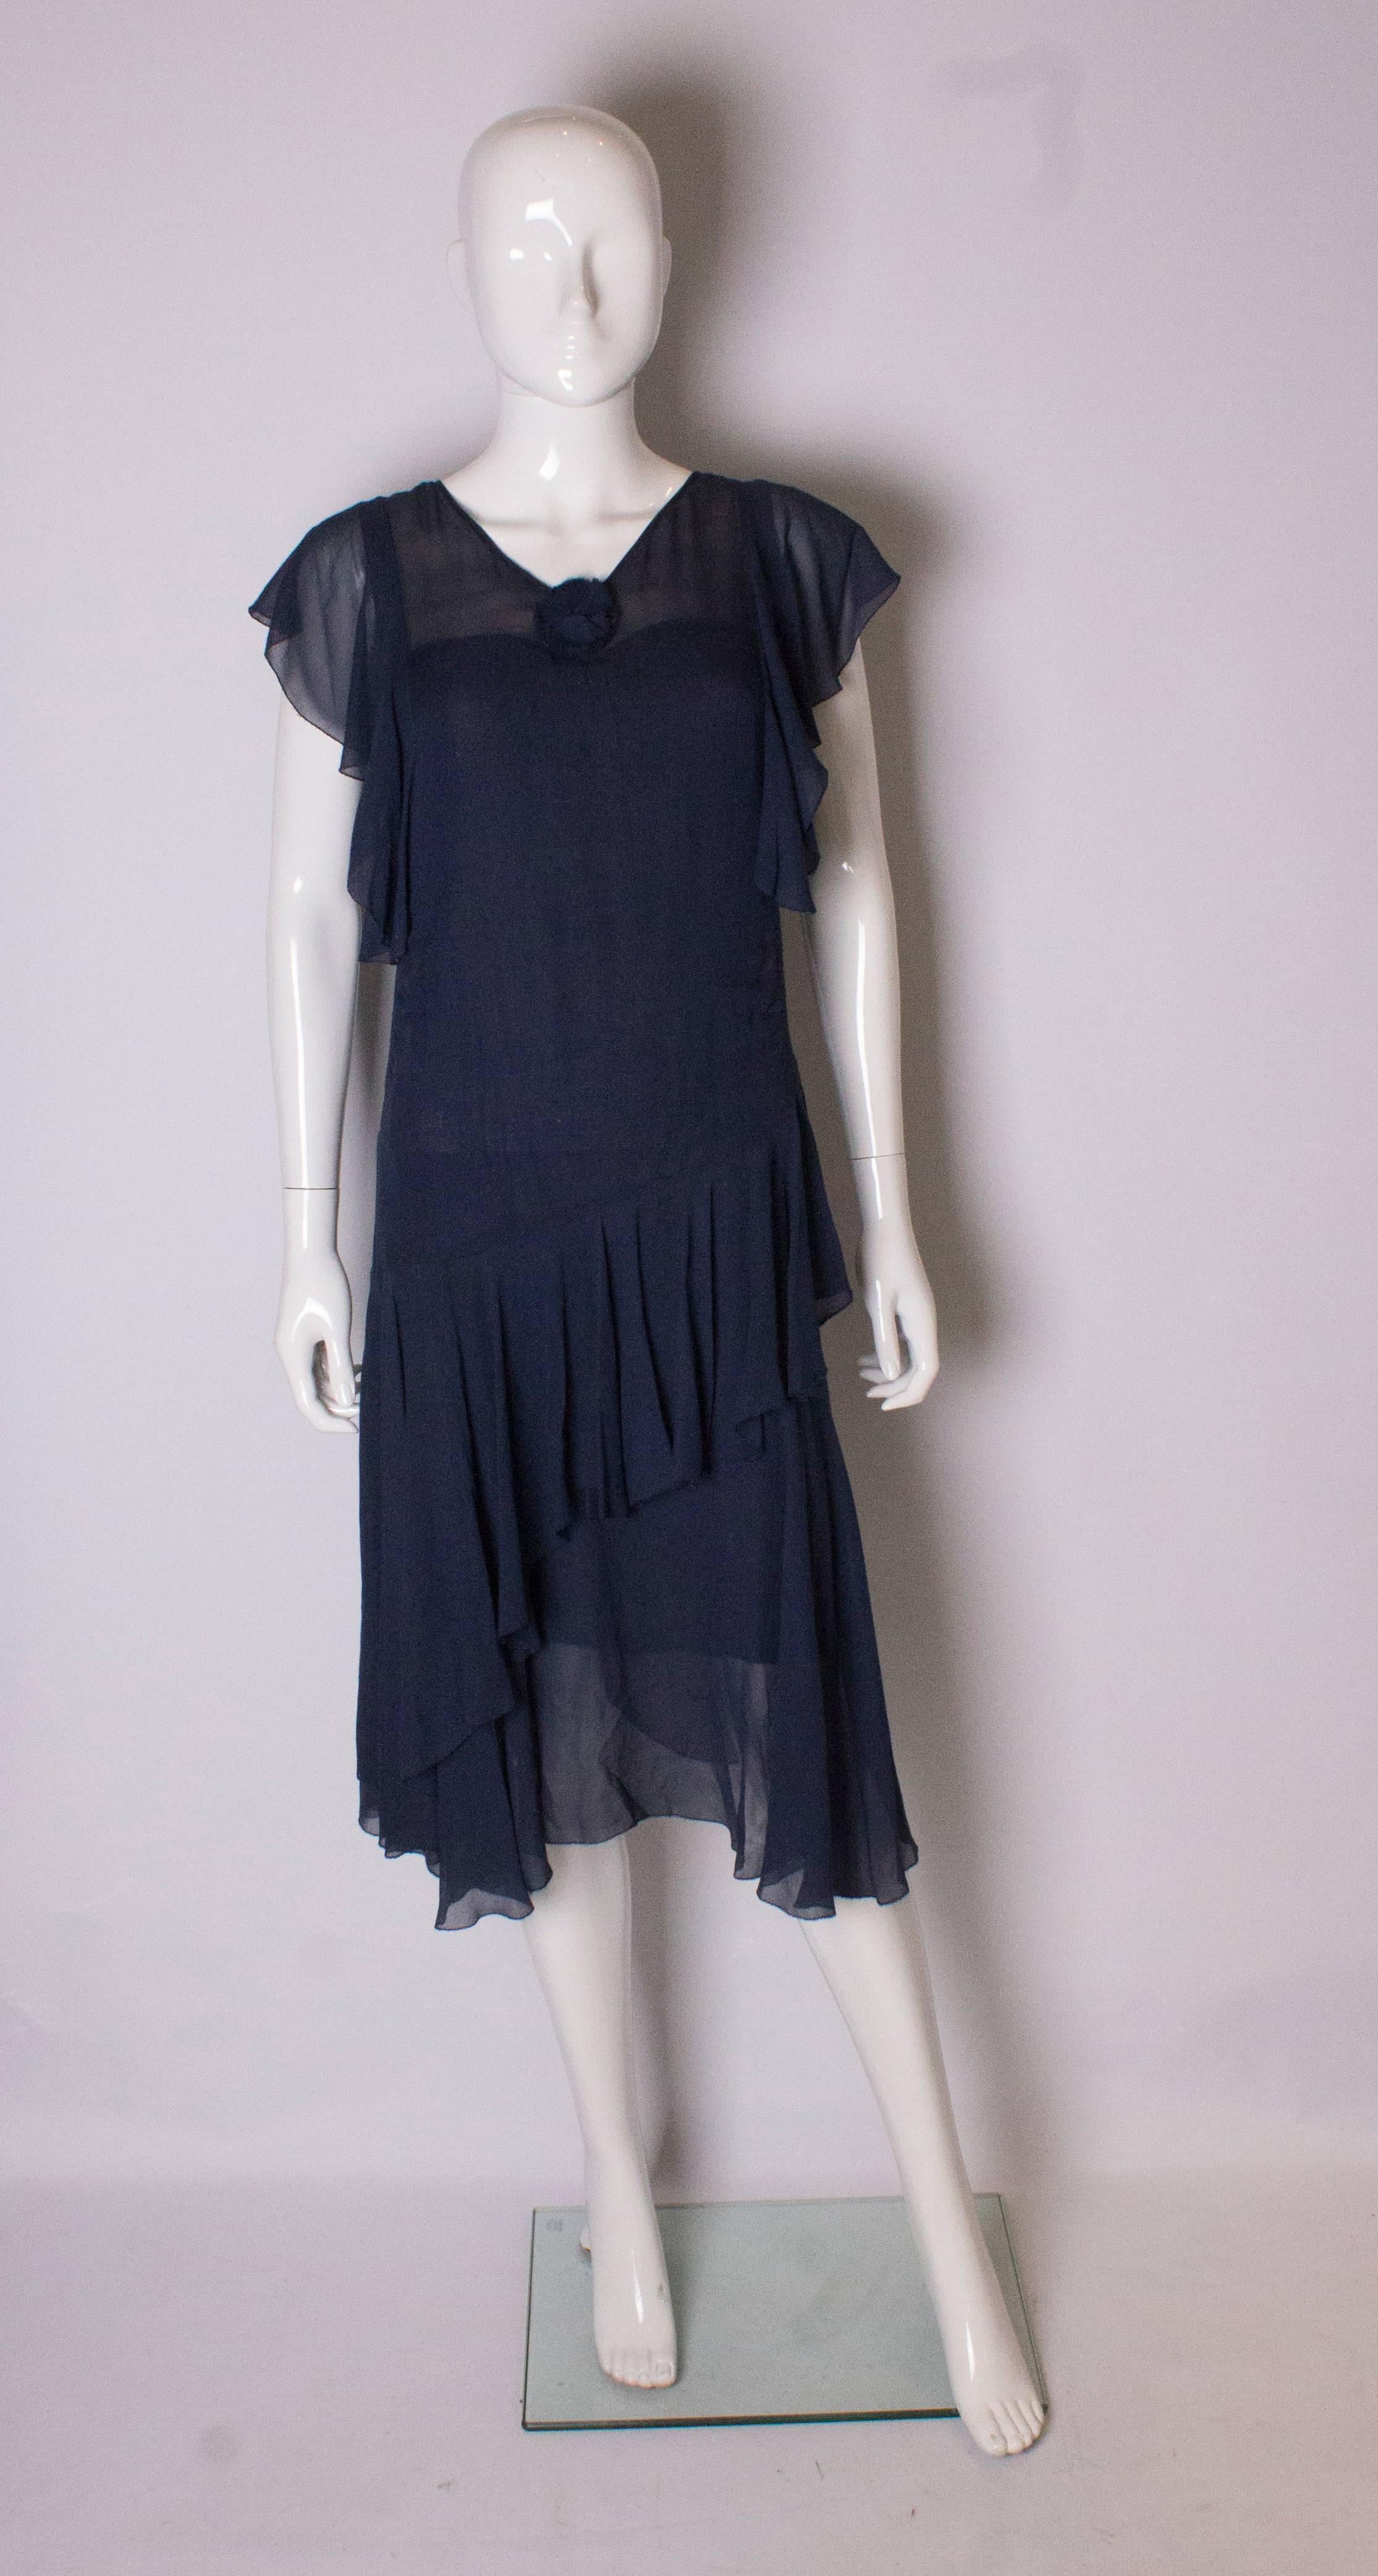 A pretty vintage French navy dress from the 1930s. In a chiffon like fabric, the dress has a v neckline, cap sleeves , diagonal frills at the front, and frills at the back. It is fully lined.